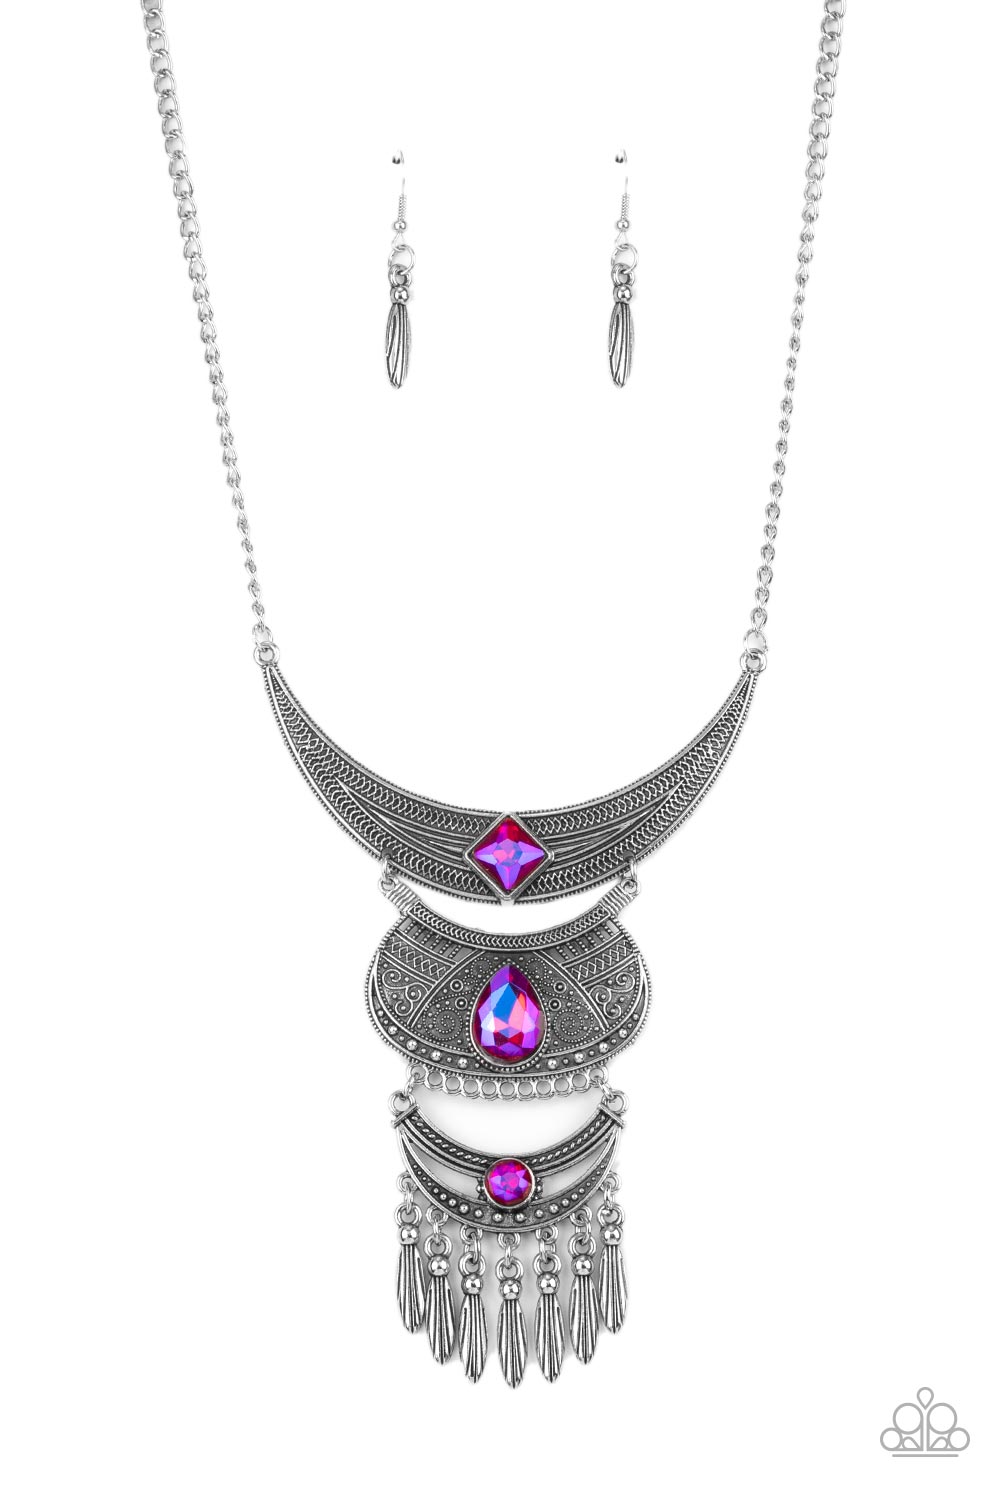 Lunar Enchantment Pink UV Shimmer Rhinestone and Silver Necklace - Paparazzi Accessories- lightbox - CarasShop.com - $5 Jewelry by Cara Jewels